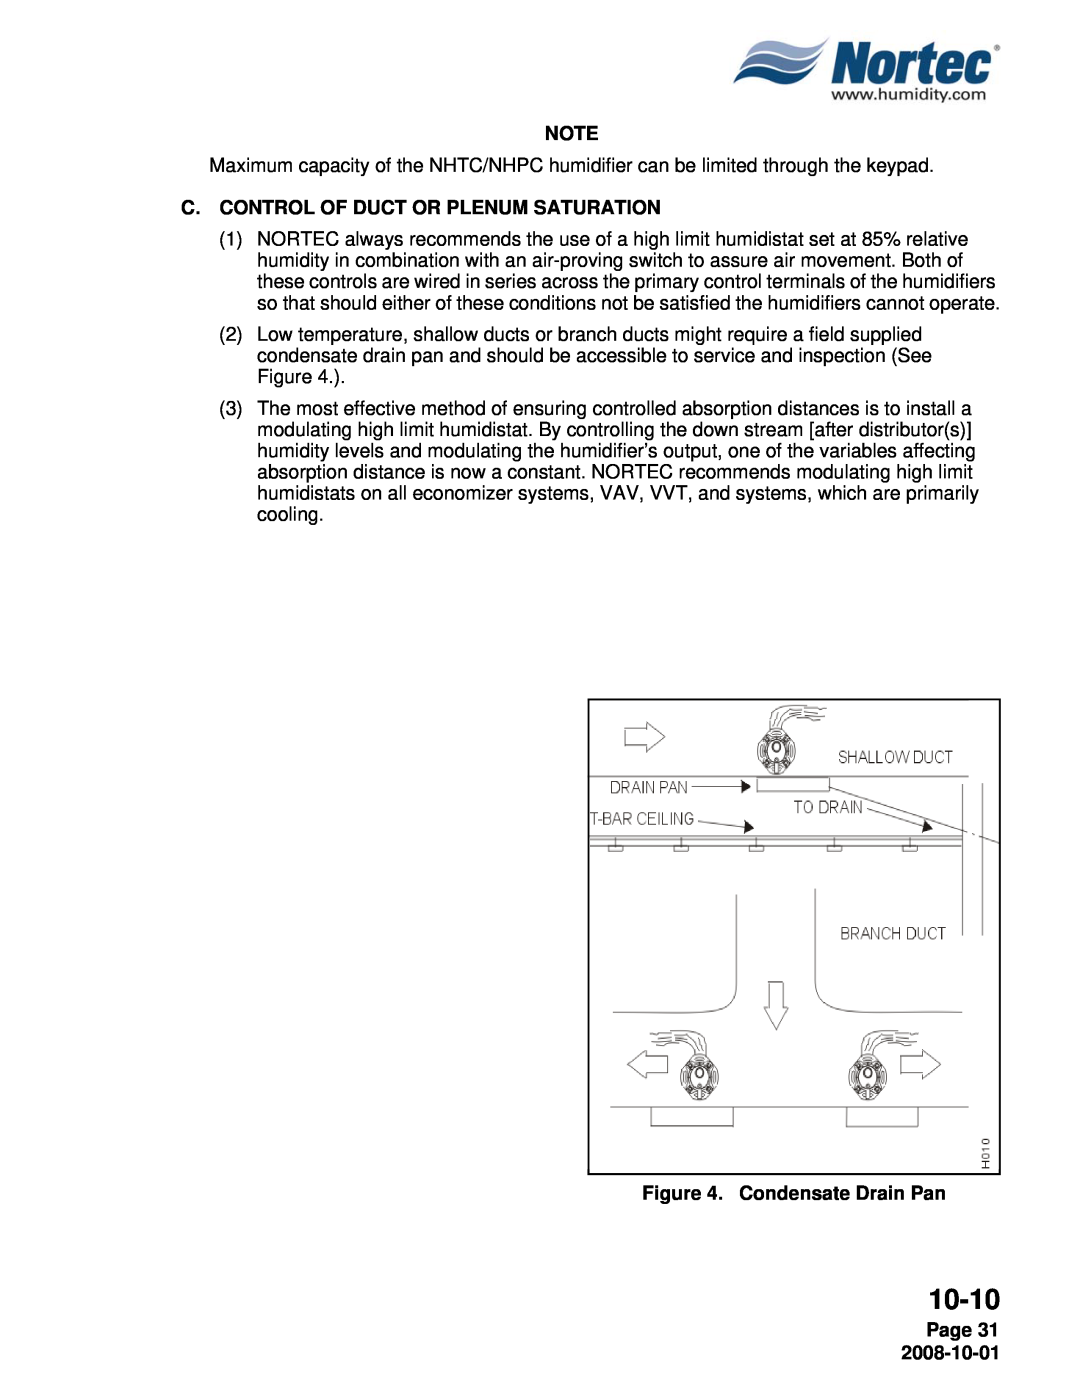 Nortec NHTC, NHPC manual 10-10, C.Control Of Duct Or Plenum Saturation, Condensate Drain Pan, Page 31 